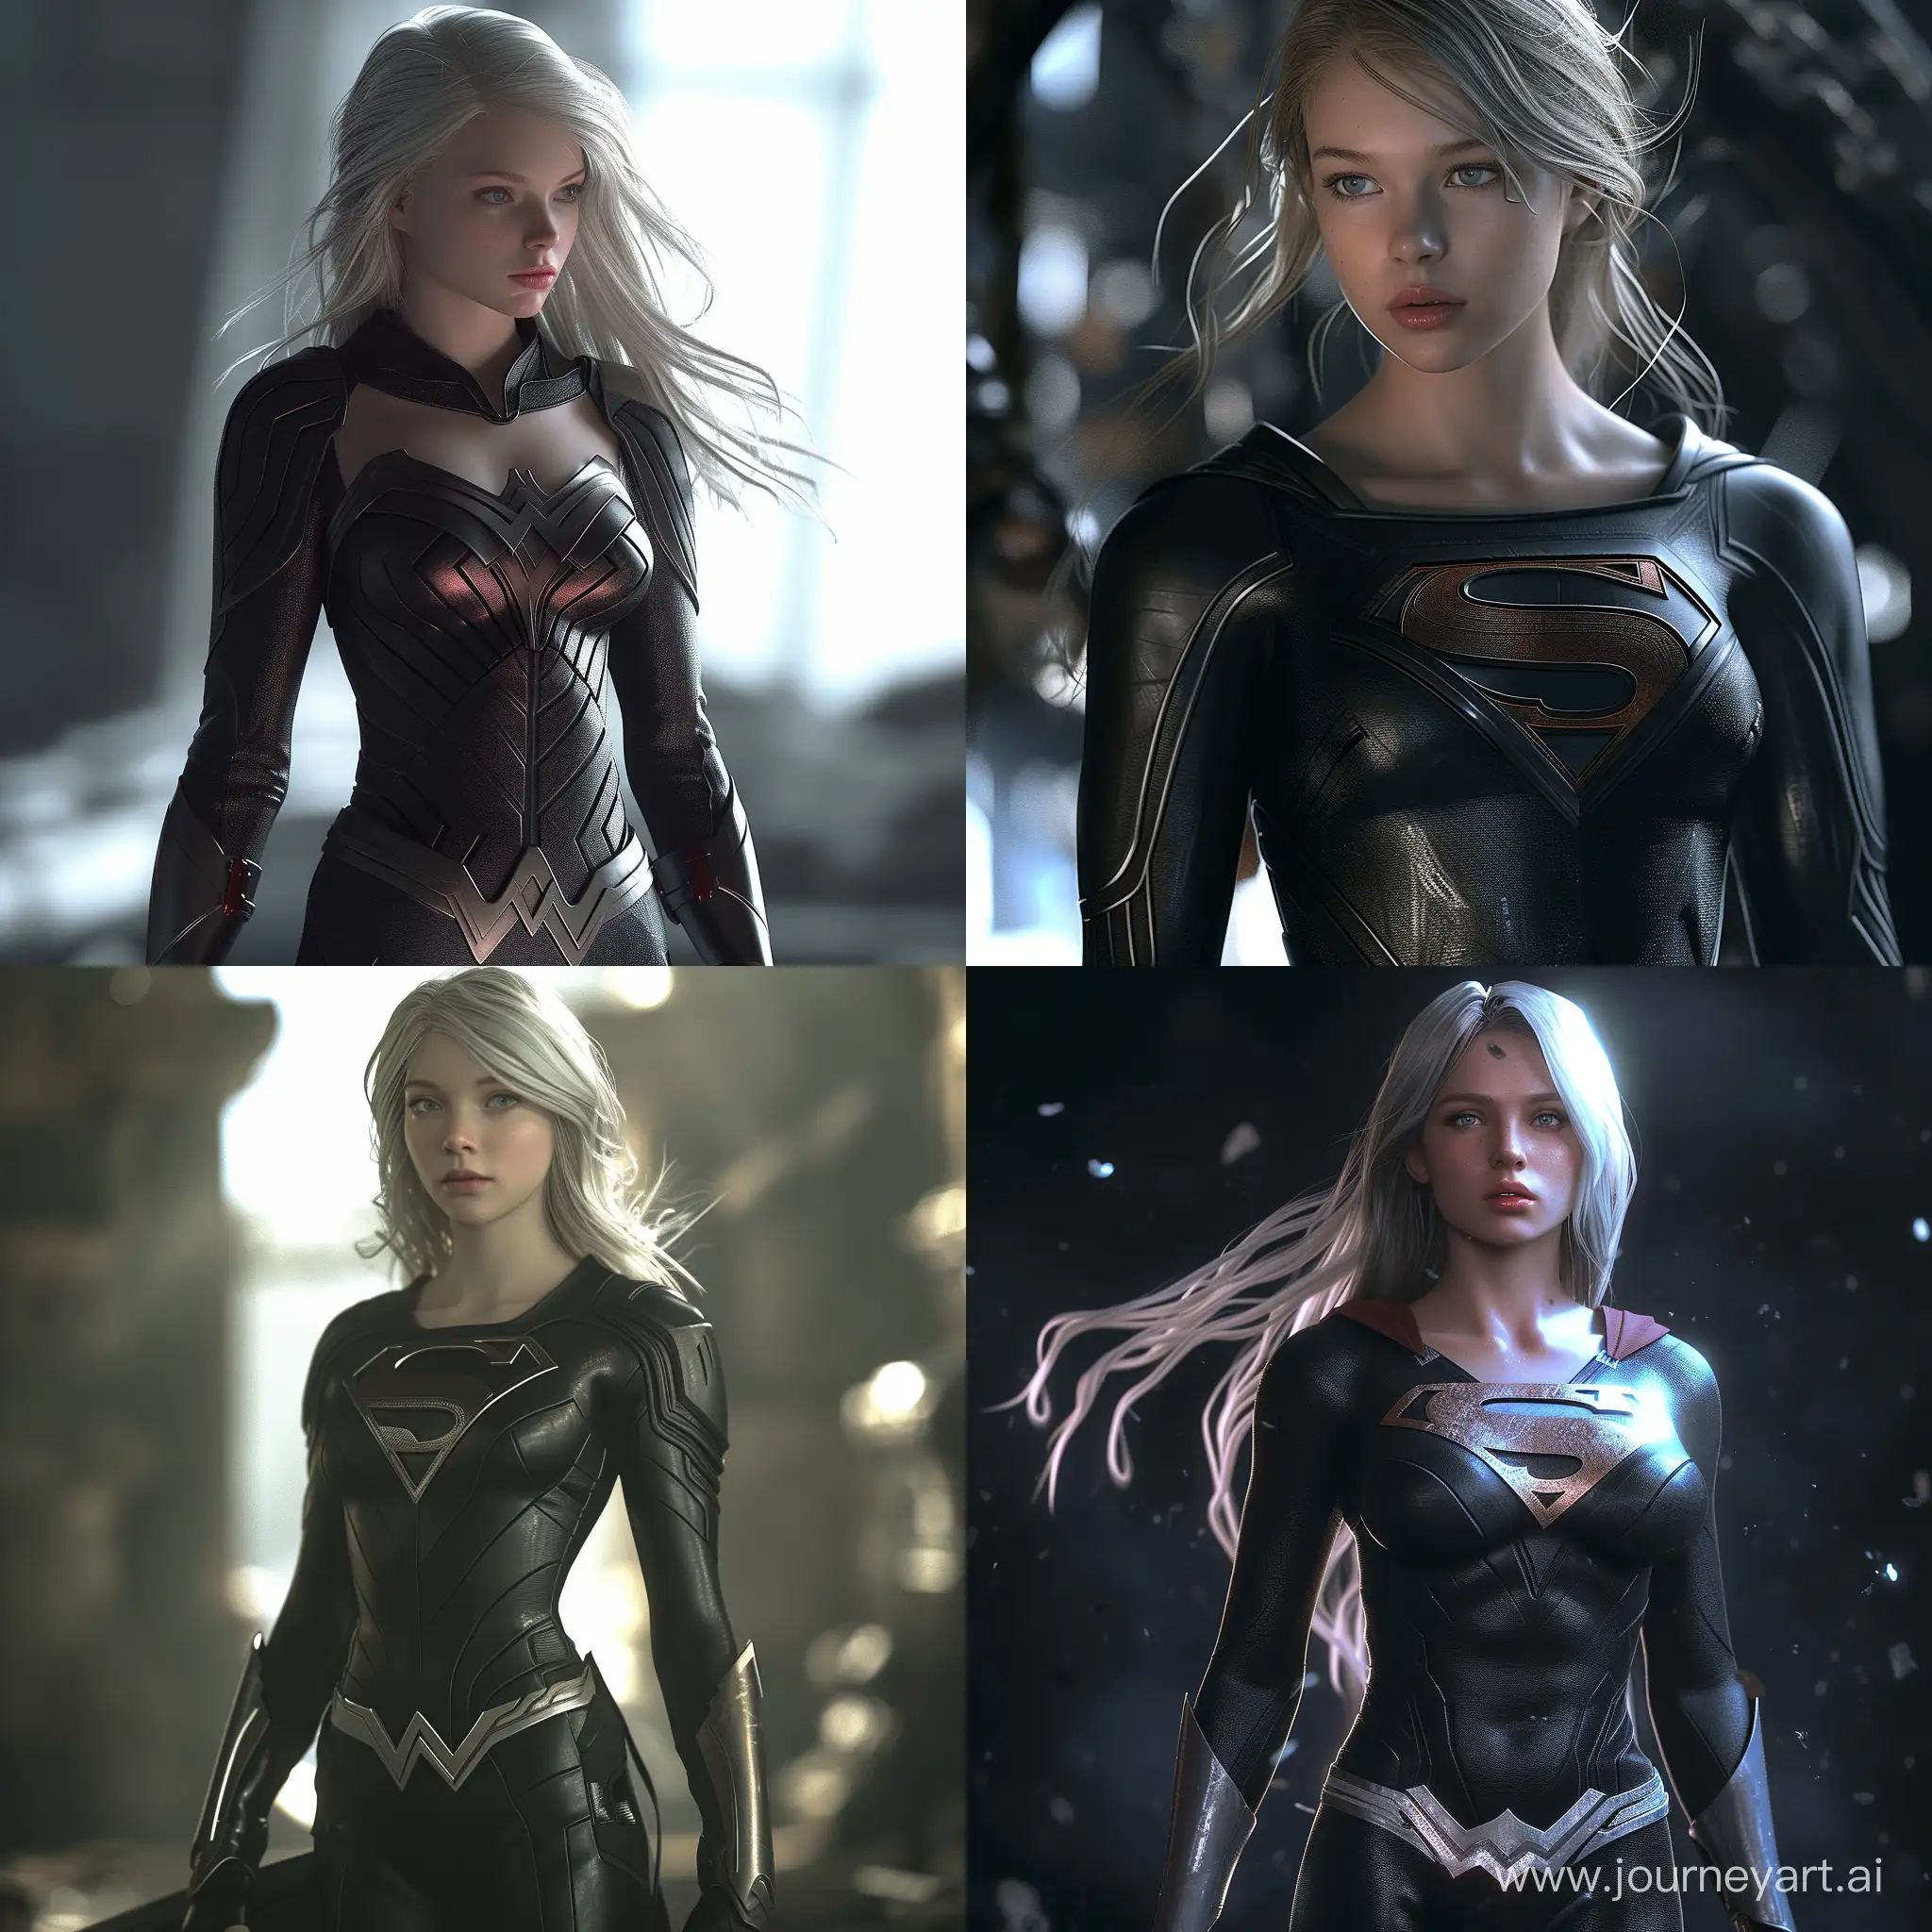 Stunning-8K-Superhero-Art-Young-Supergirl-in-Dark-Suit-with-Perfect-Details